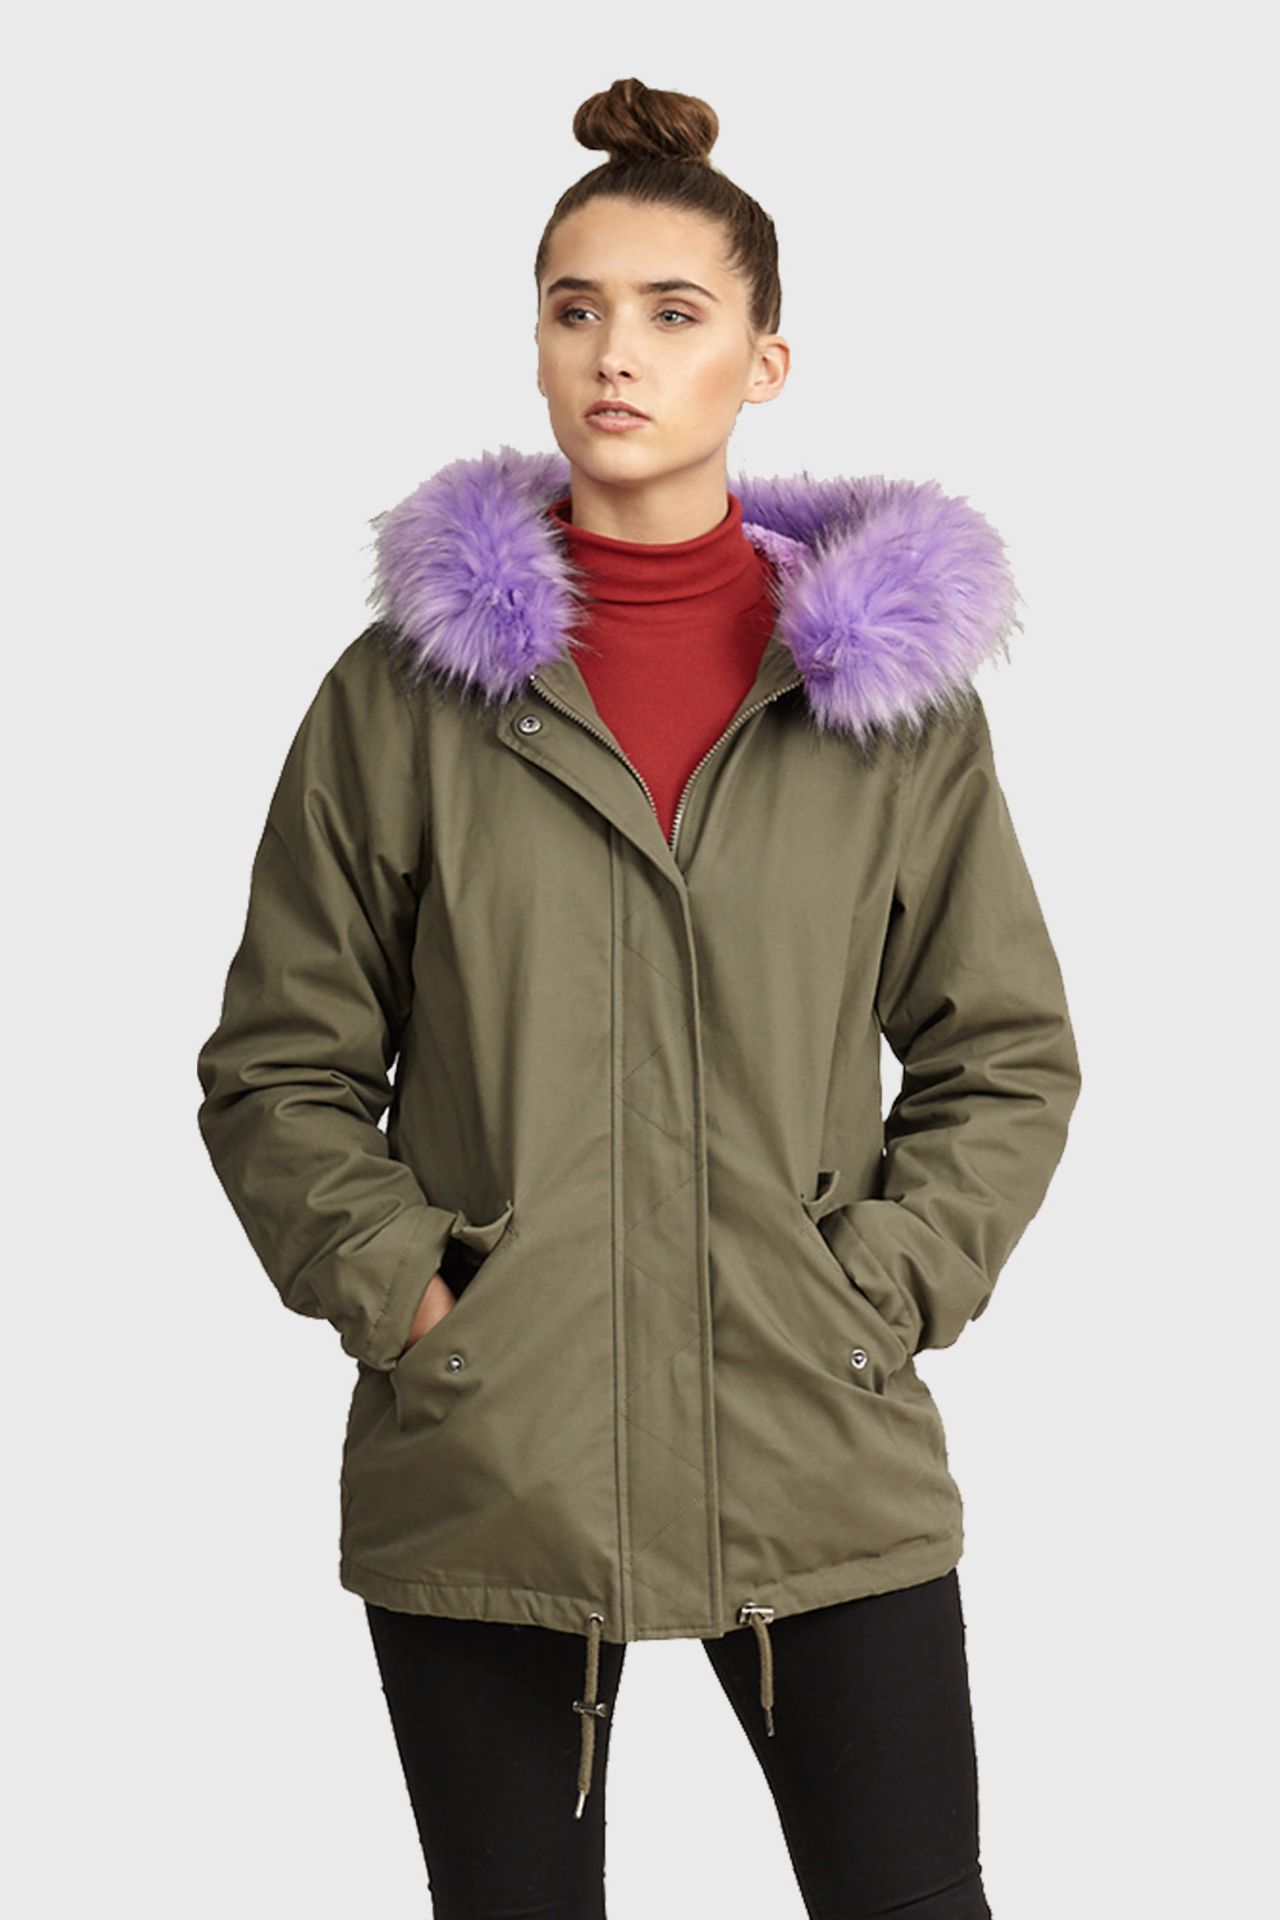 13 X PIECE BRAND NEW MIXED LOT CONTAINING 3 BRAVE SOUL WOMEN'S PARKA COAT WITH FAUX FUR HOOD TRIM IN - Image 2 of 2